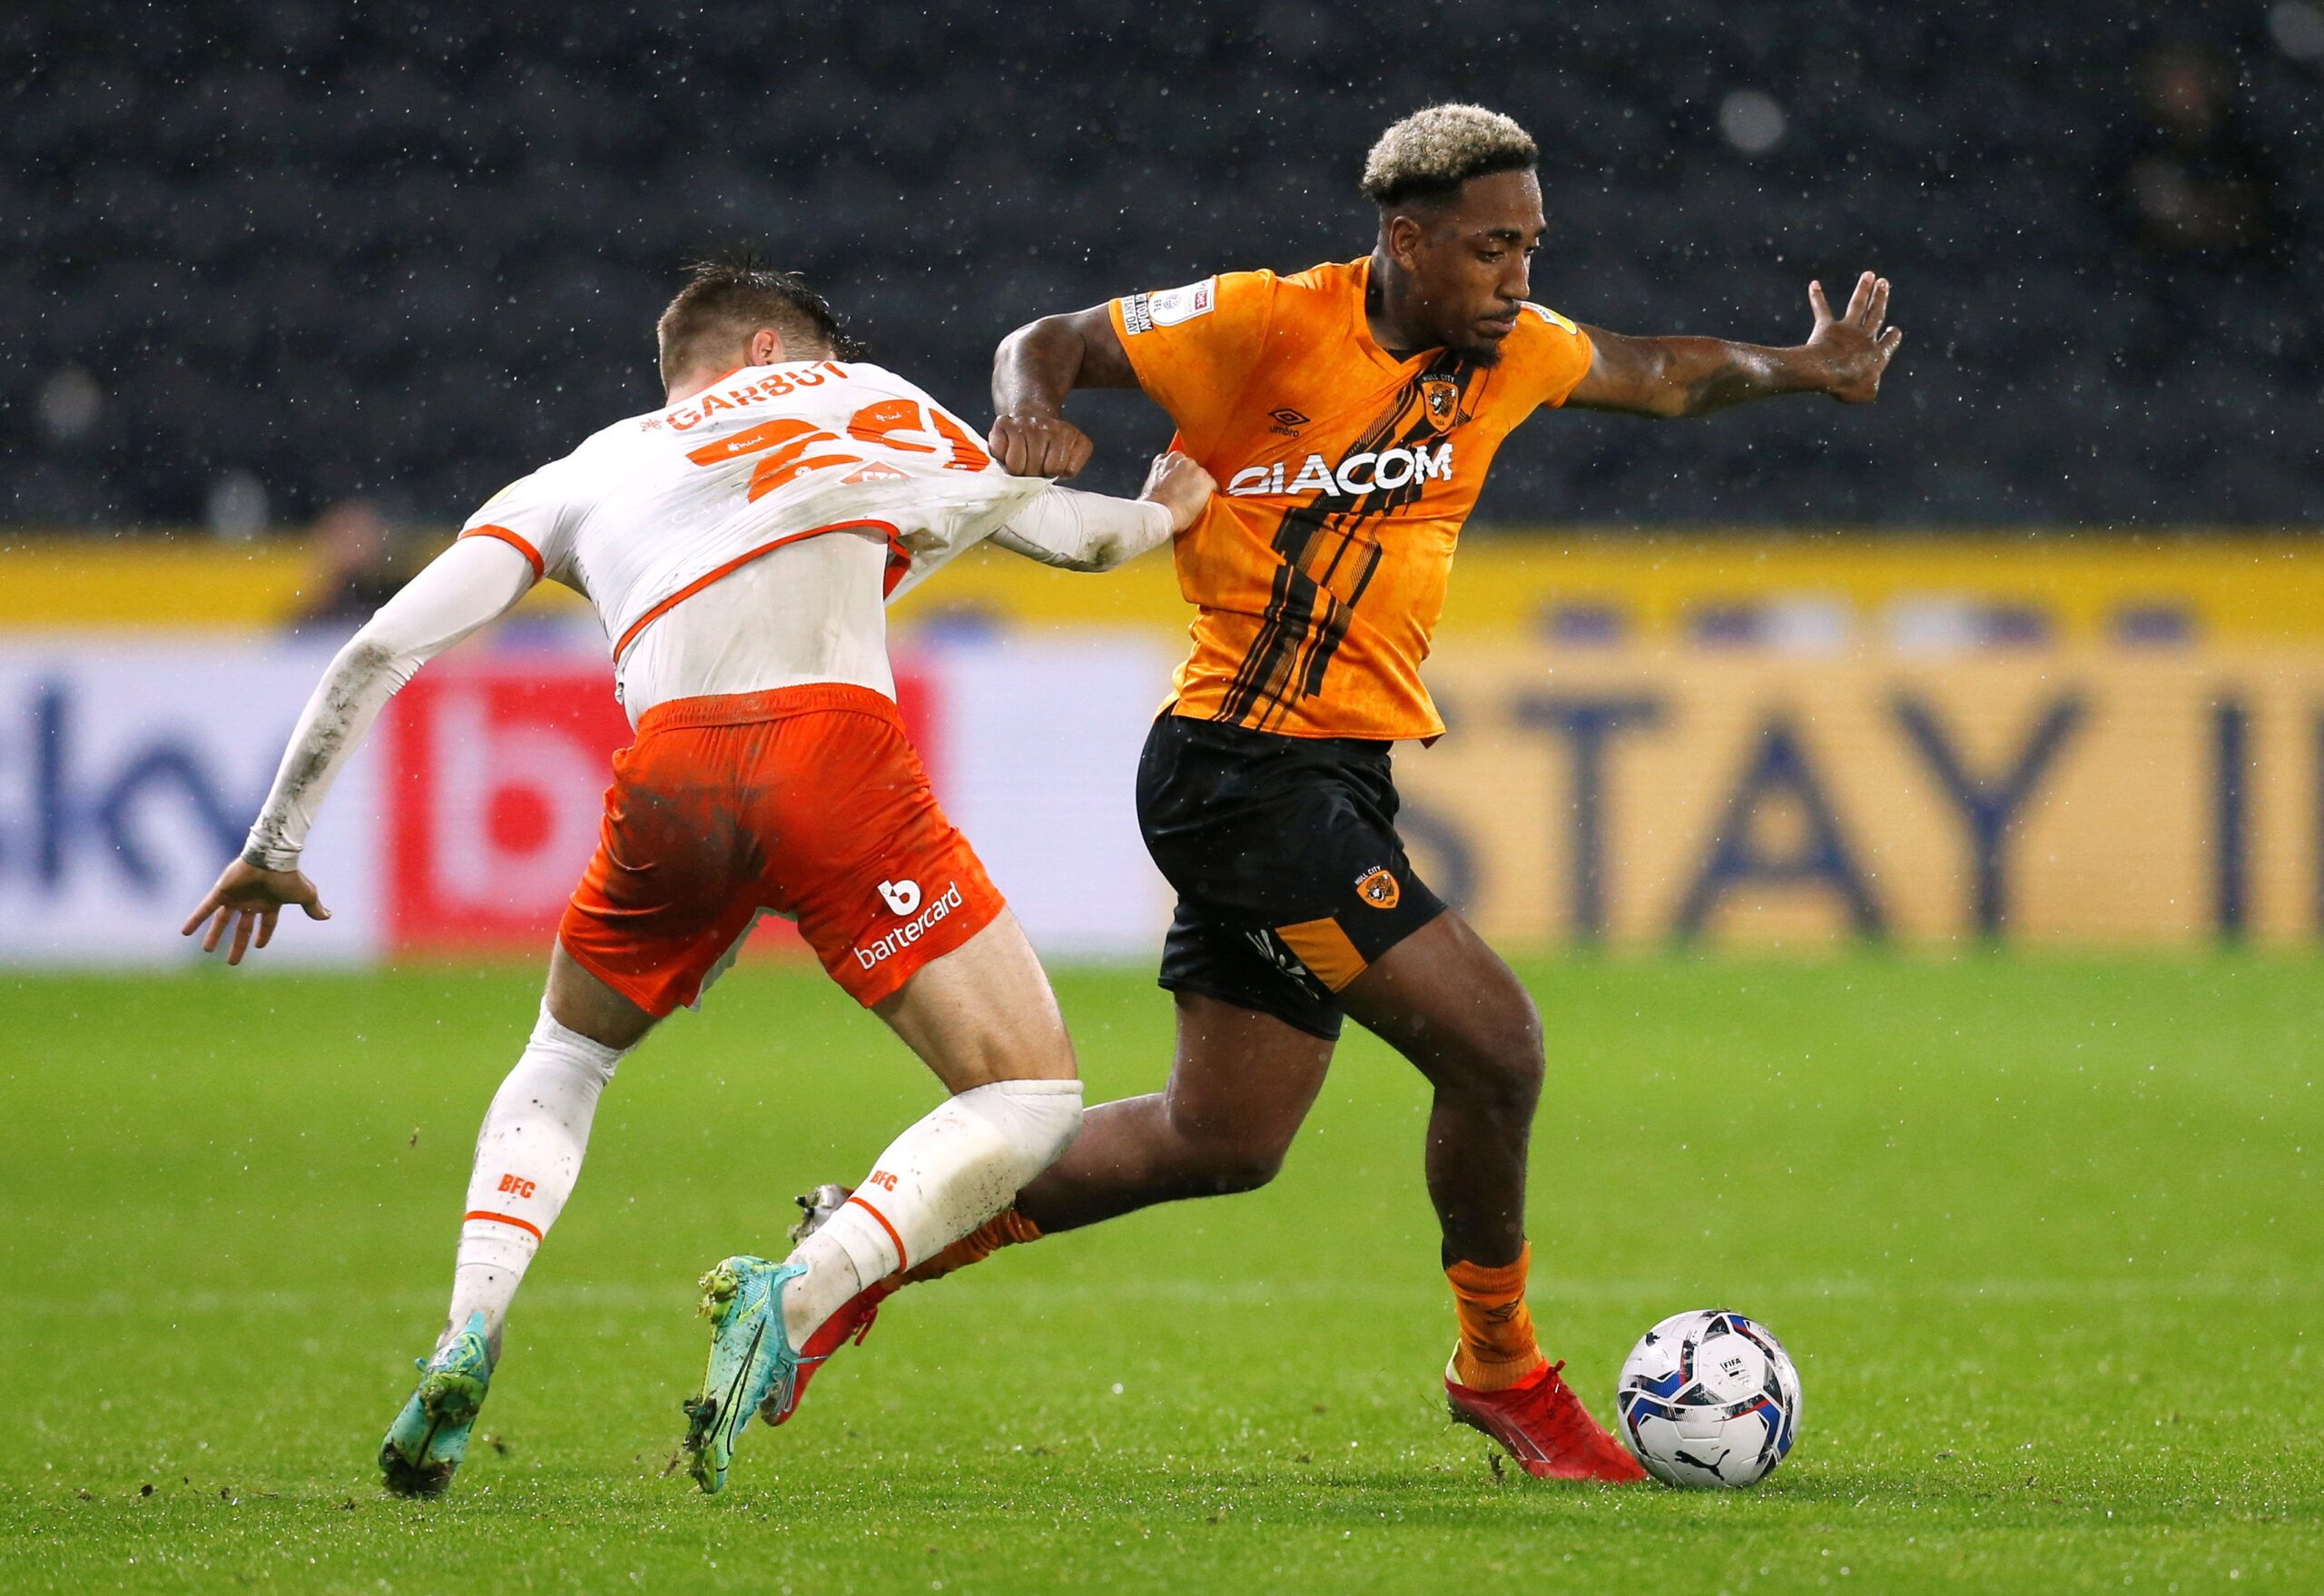 Soccer Football - Championship - Hull City v Blackpool - KCOM Stadium, Hull, Britain - September 28, 2021  Hull City's Mallik Wilks in action with Blackpool's Luke Garbutt  Action Images/Ed Sykes  EDITORIAL USE ONLY. No use with unauthorized audio, video, data, fixture lists, club/league logos or 